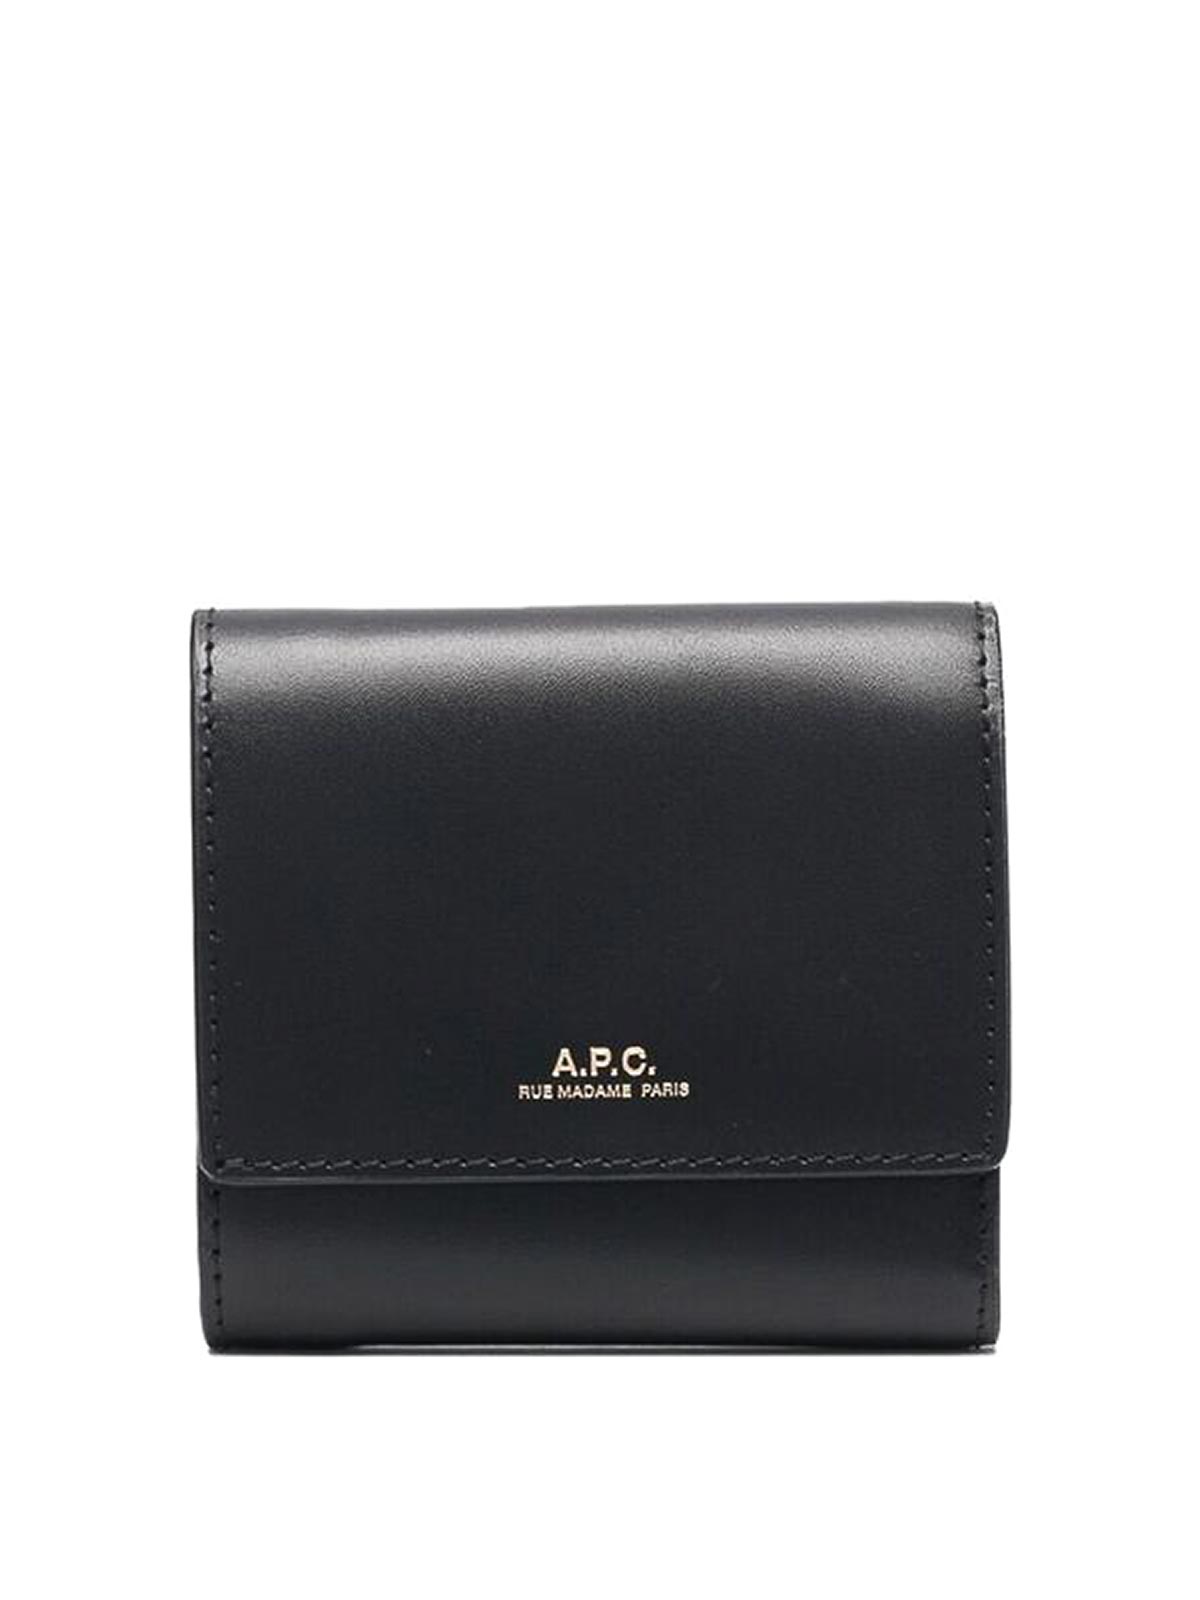 A.p.c. Trifold Leather Wallet In Black